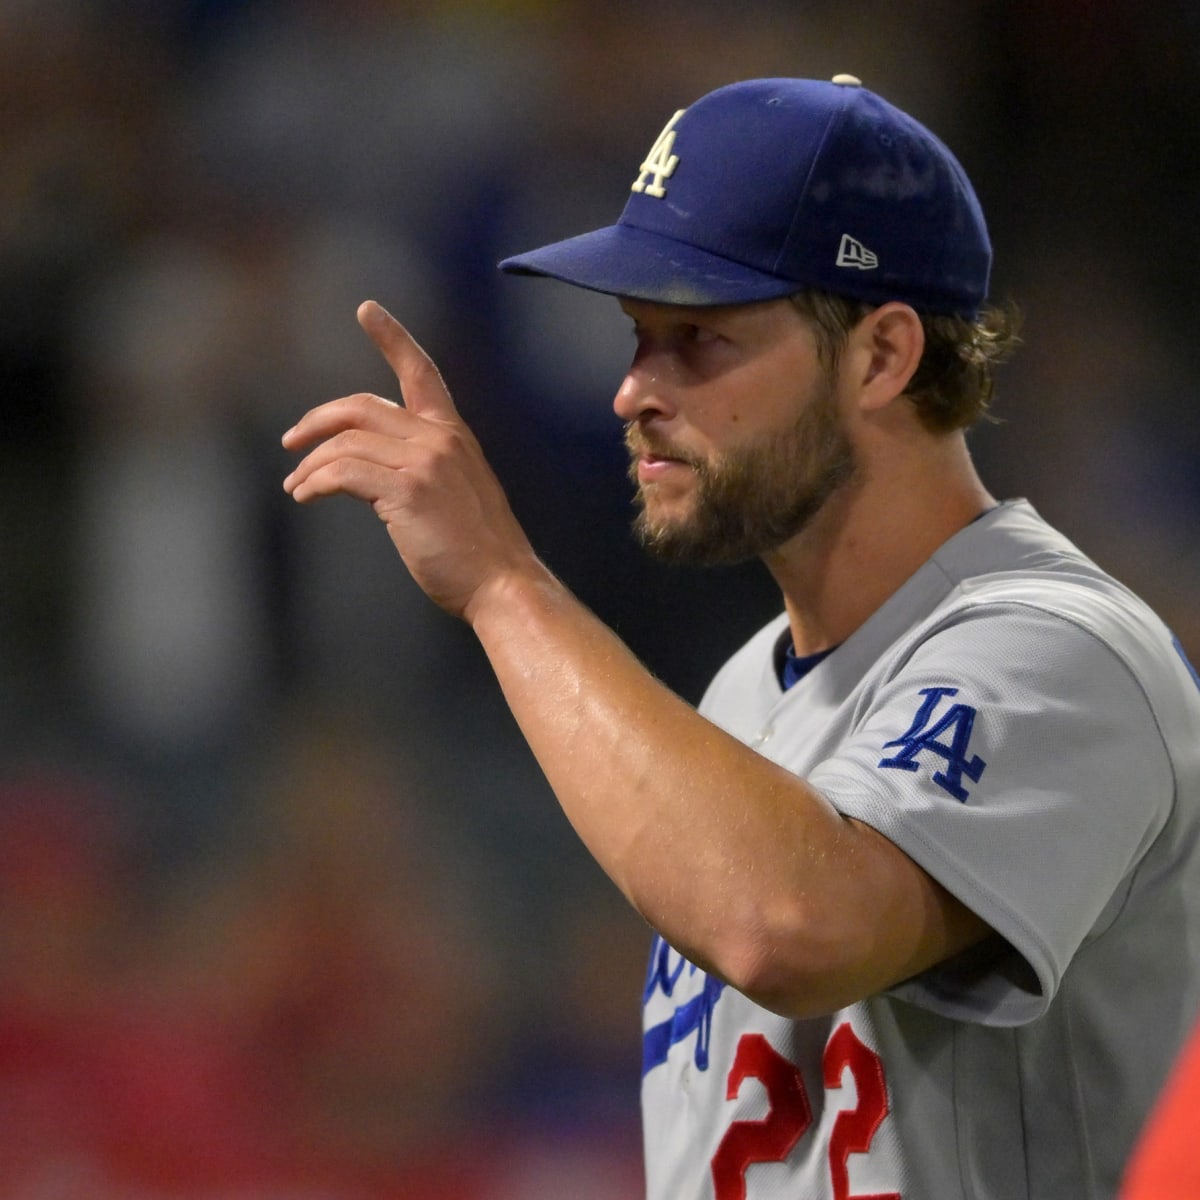 Dodgers lefty Clayton Kershaw gets another playoff start in NLDS opener  against Diamondbacks